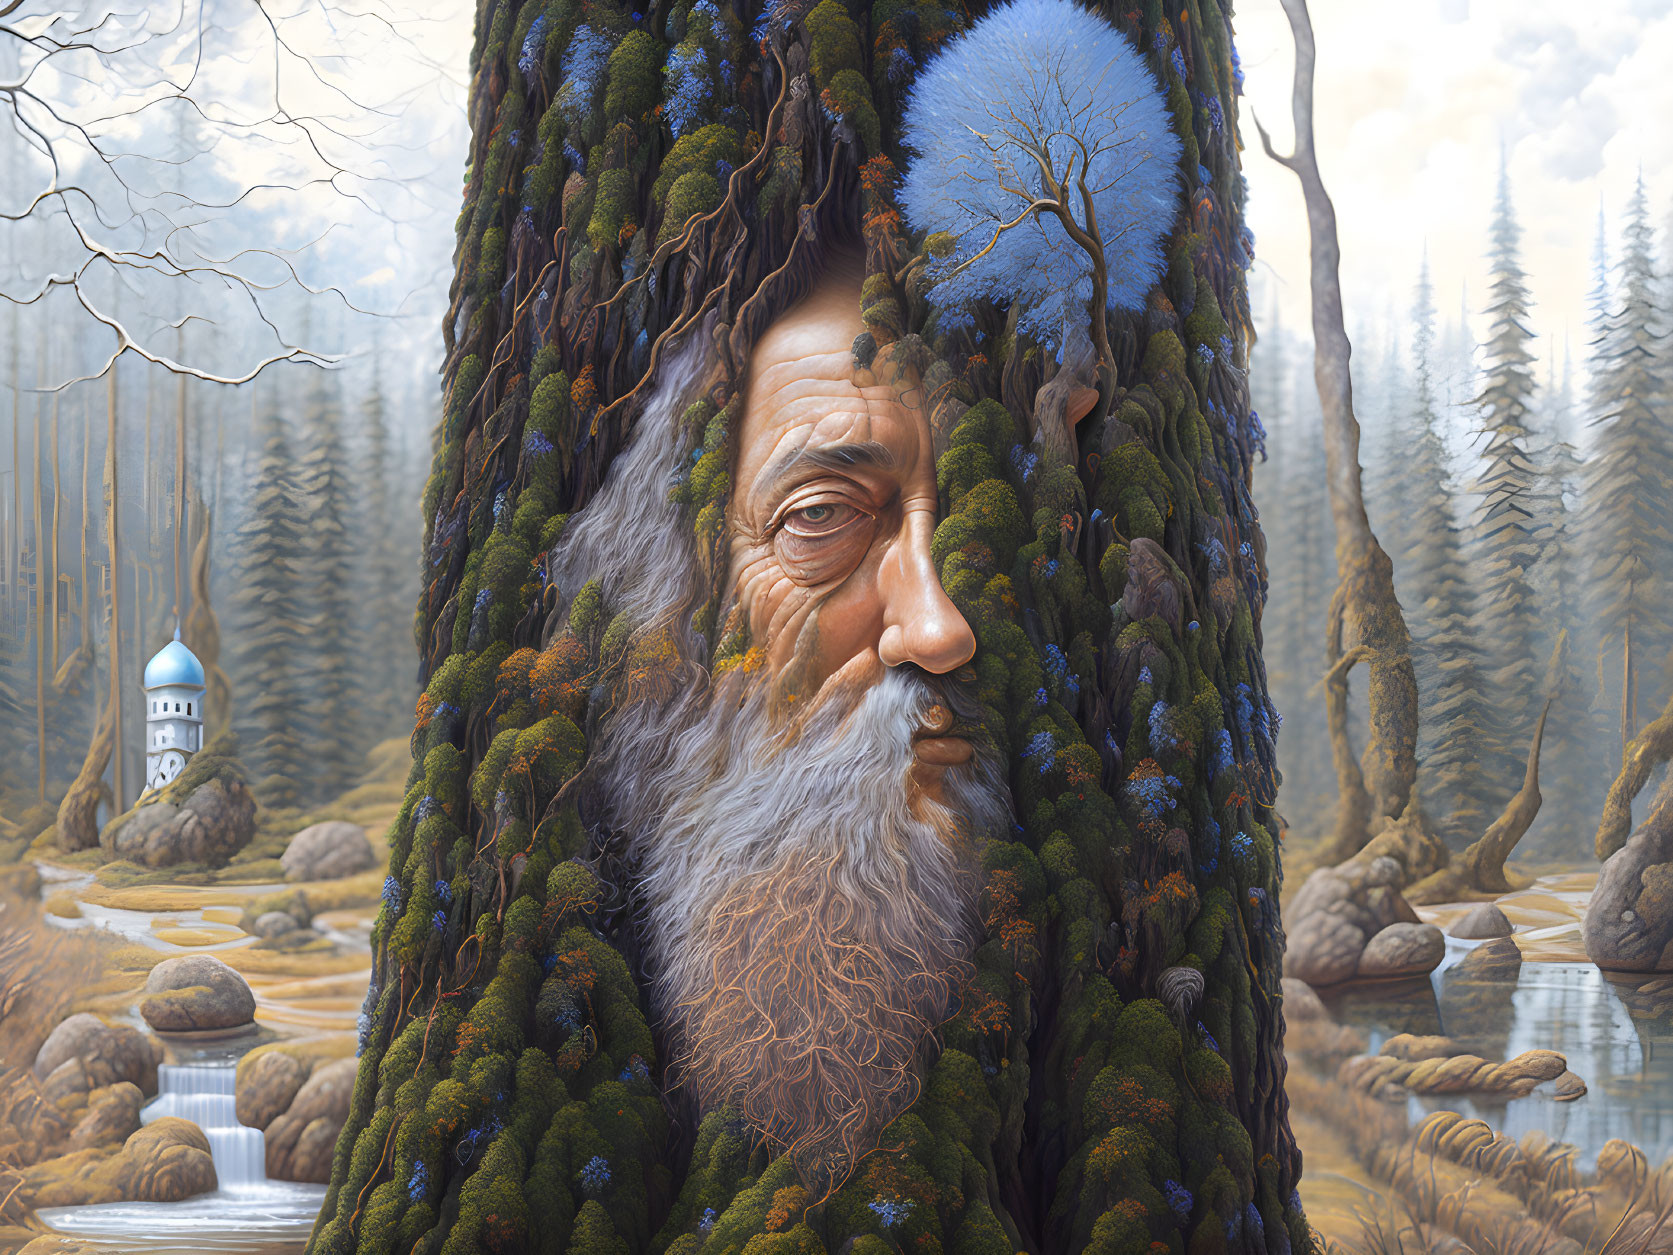 Illustration of wise old man's face merged with tree trunk in serene forest with waterfall and castle.